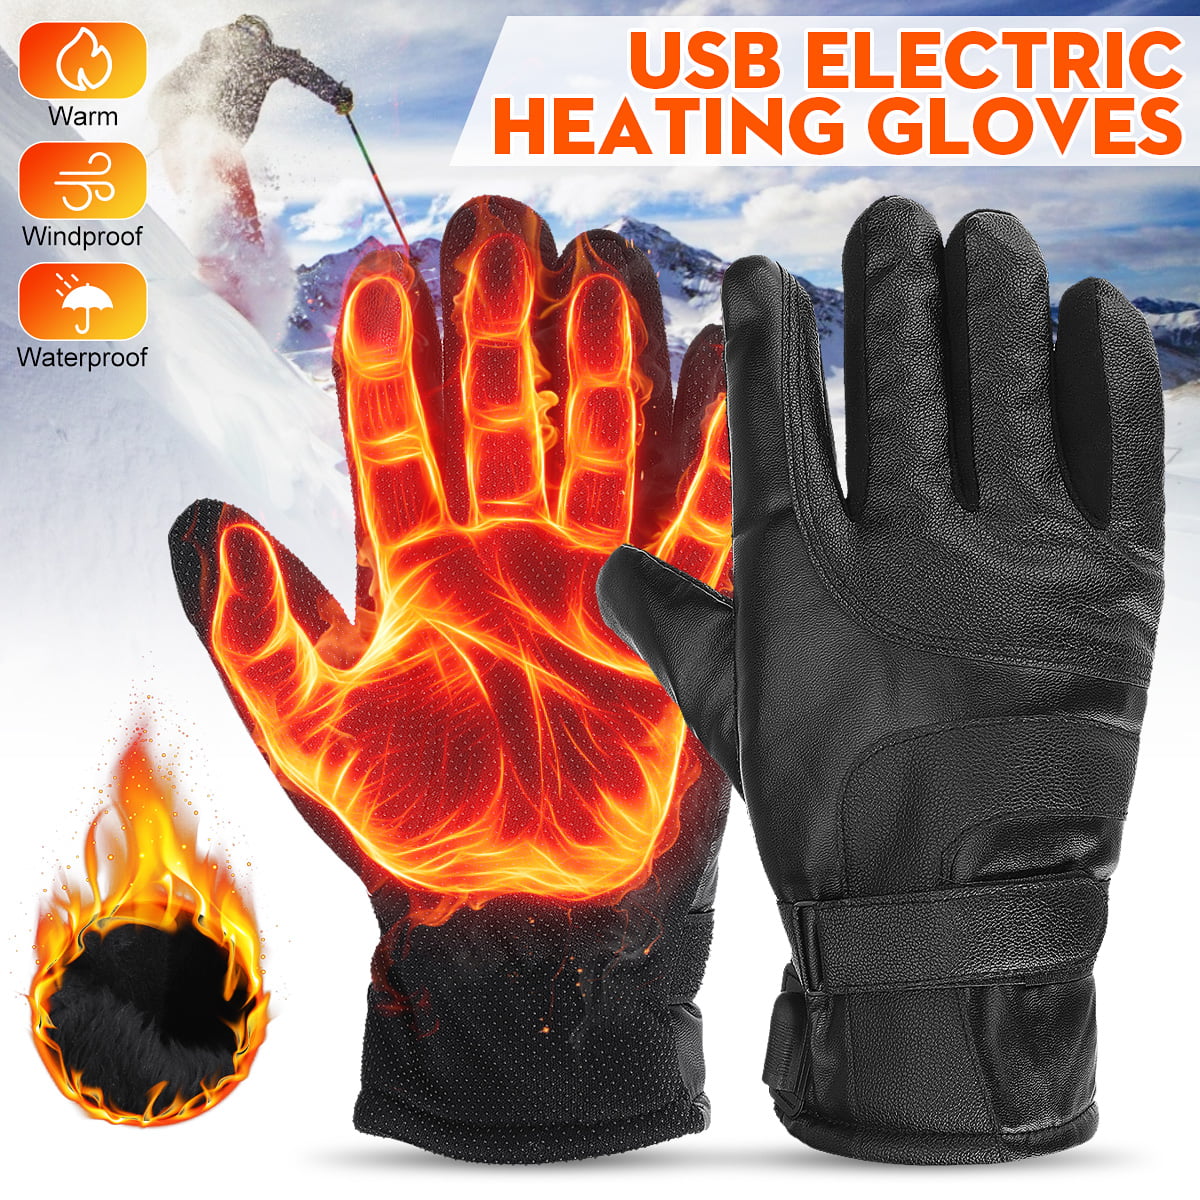 by Oclot USB Electric Heated Gloves with Touchscreen Finger for Men Women Winter Hands Warmer Thermal Gloves Windproof for Cold Weather Outdoor Activities 27 * 12cm 